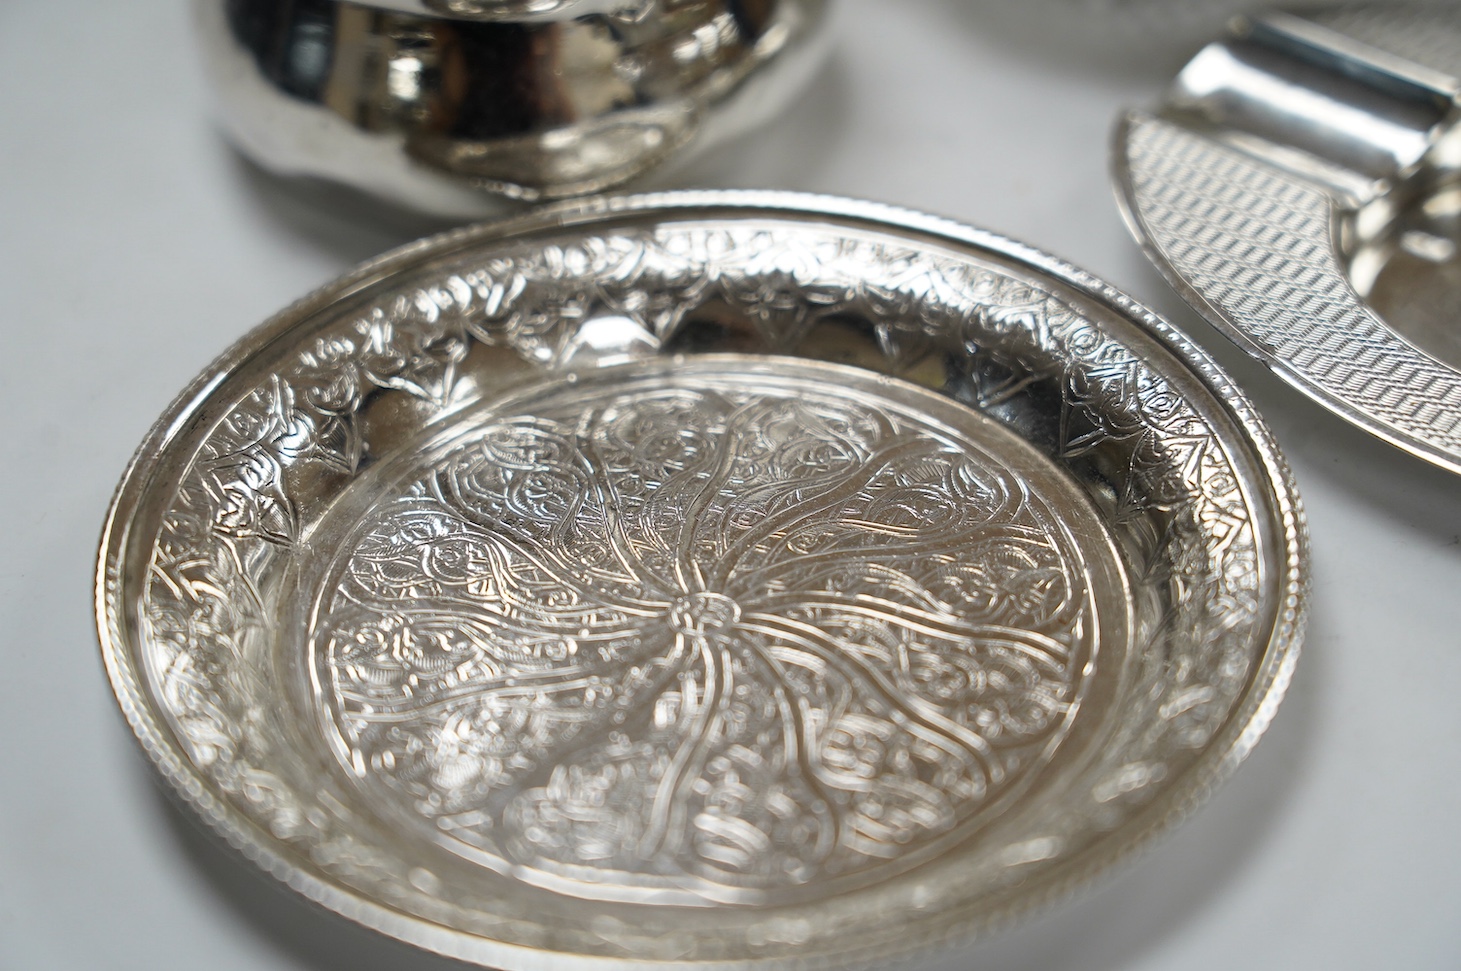 Sundry small silver and white metal items including silver tea strainer on stand and ashtray, pierced silver bowl, sterling dishes and dwarf candlesticks, etc. Condition - poor to fair